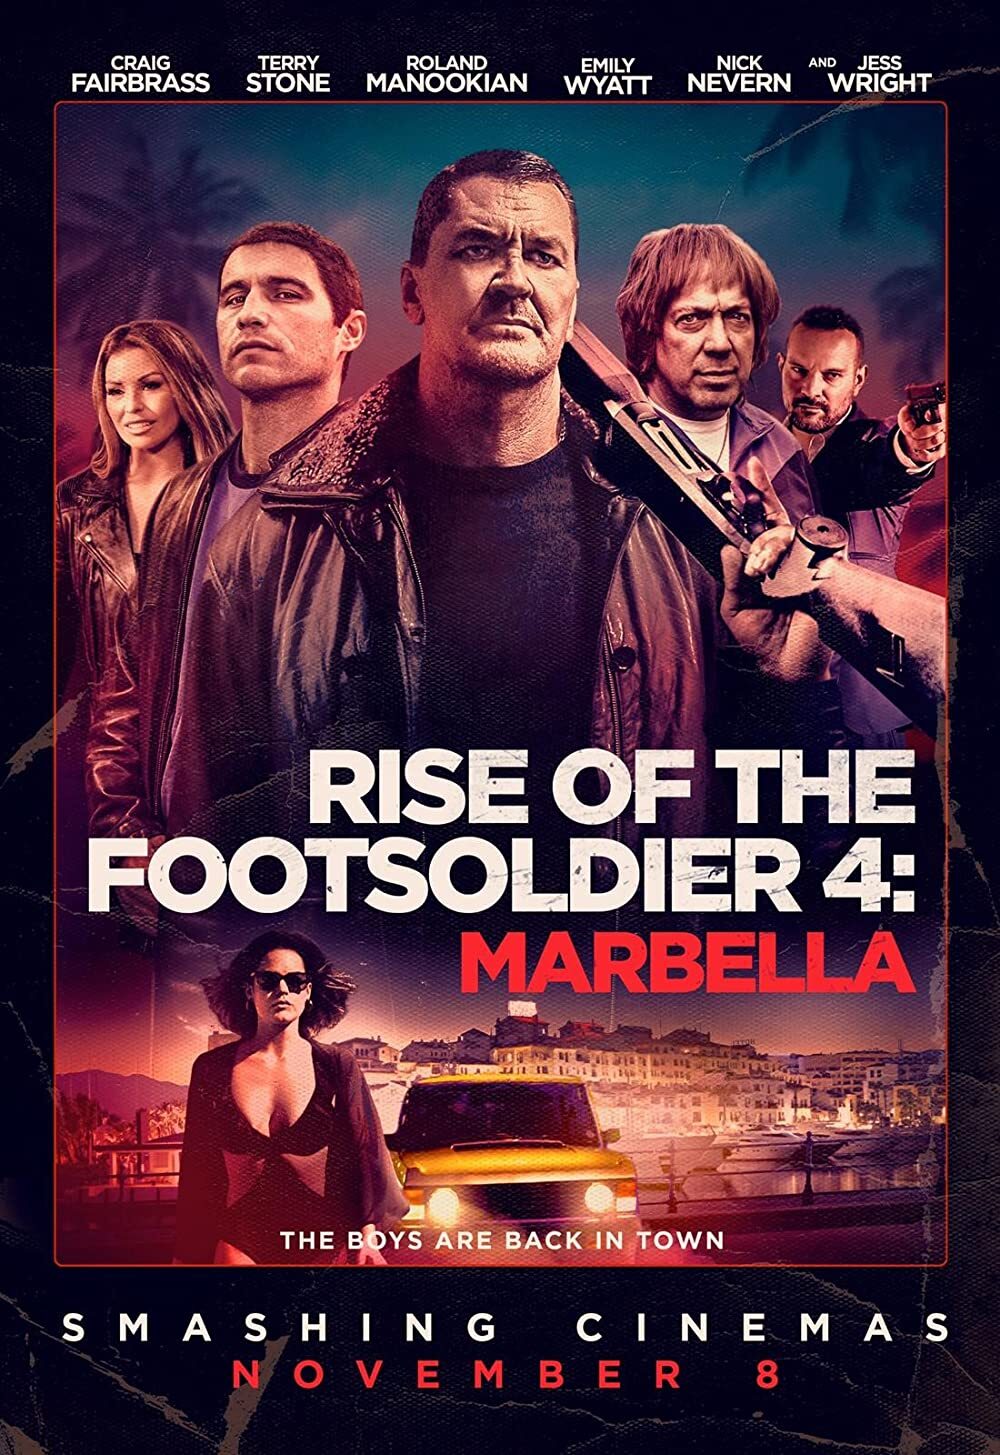 affiche du film Rise of the Footsoldier 4: Marbella